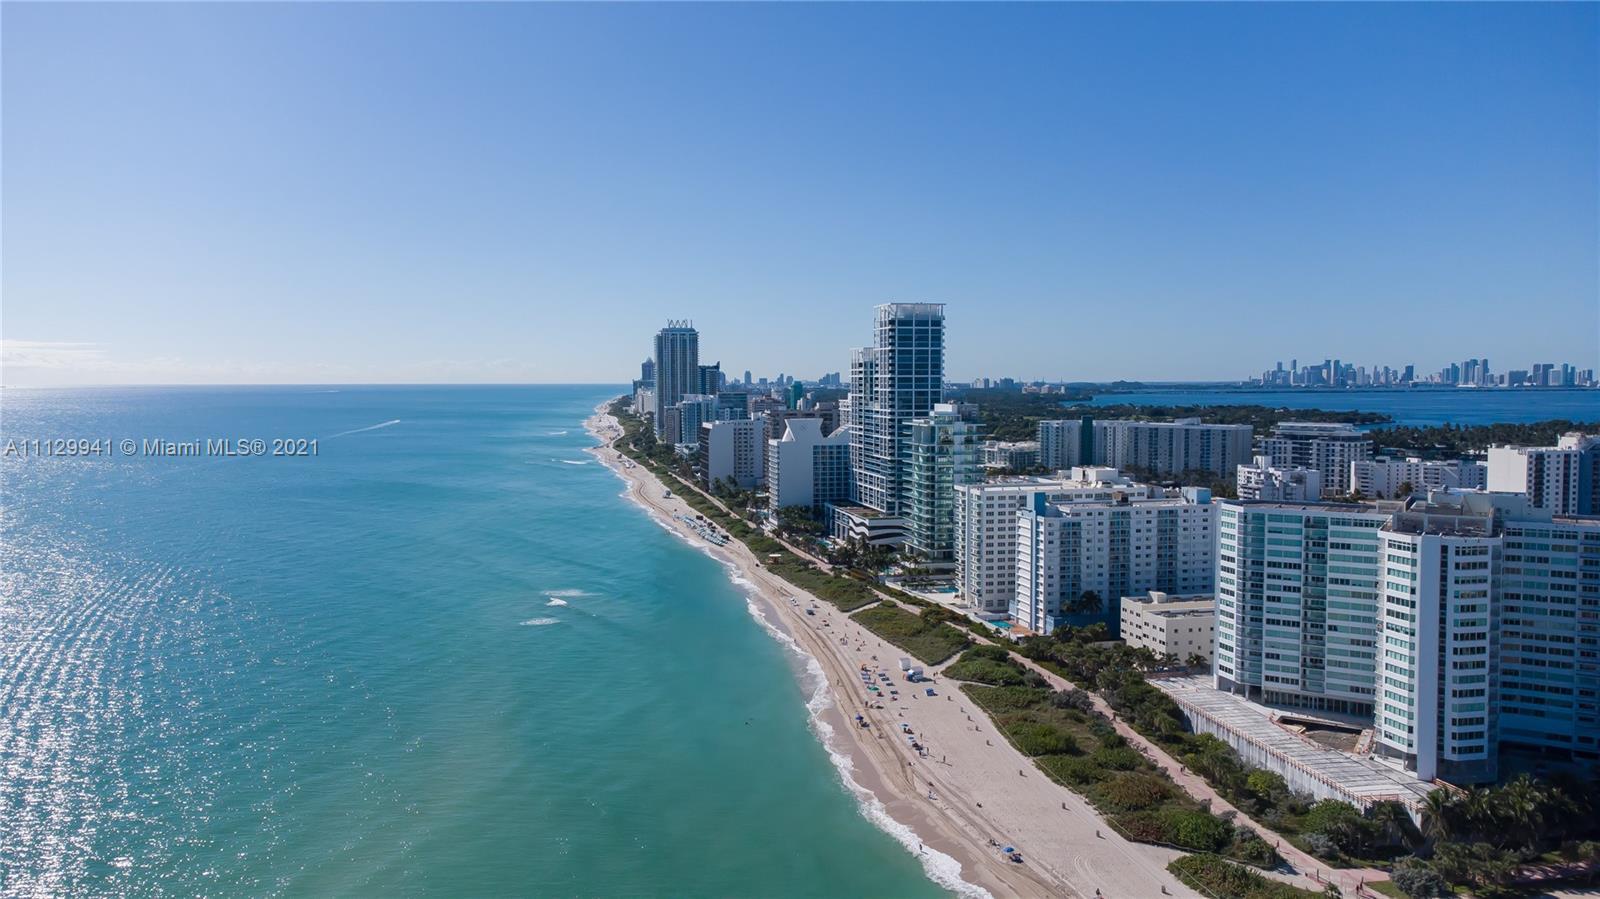 UNIQUE VIEWS FROM THIS 18 FLOOR 1455 SQ. FT. CONDO.2 BEDROOM WITH AN ENCLOSED 3RD BEDROOM WITH OCEAN